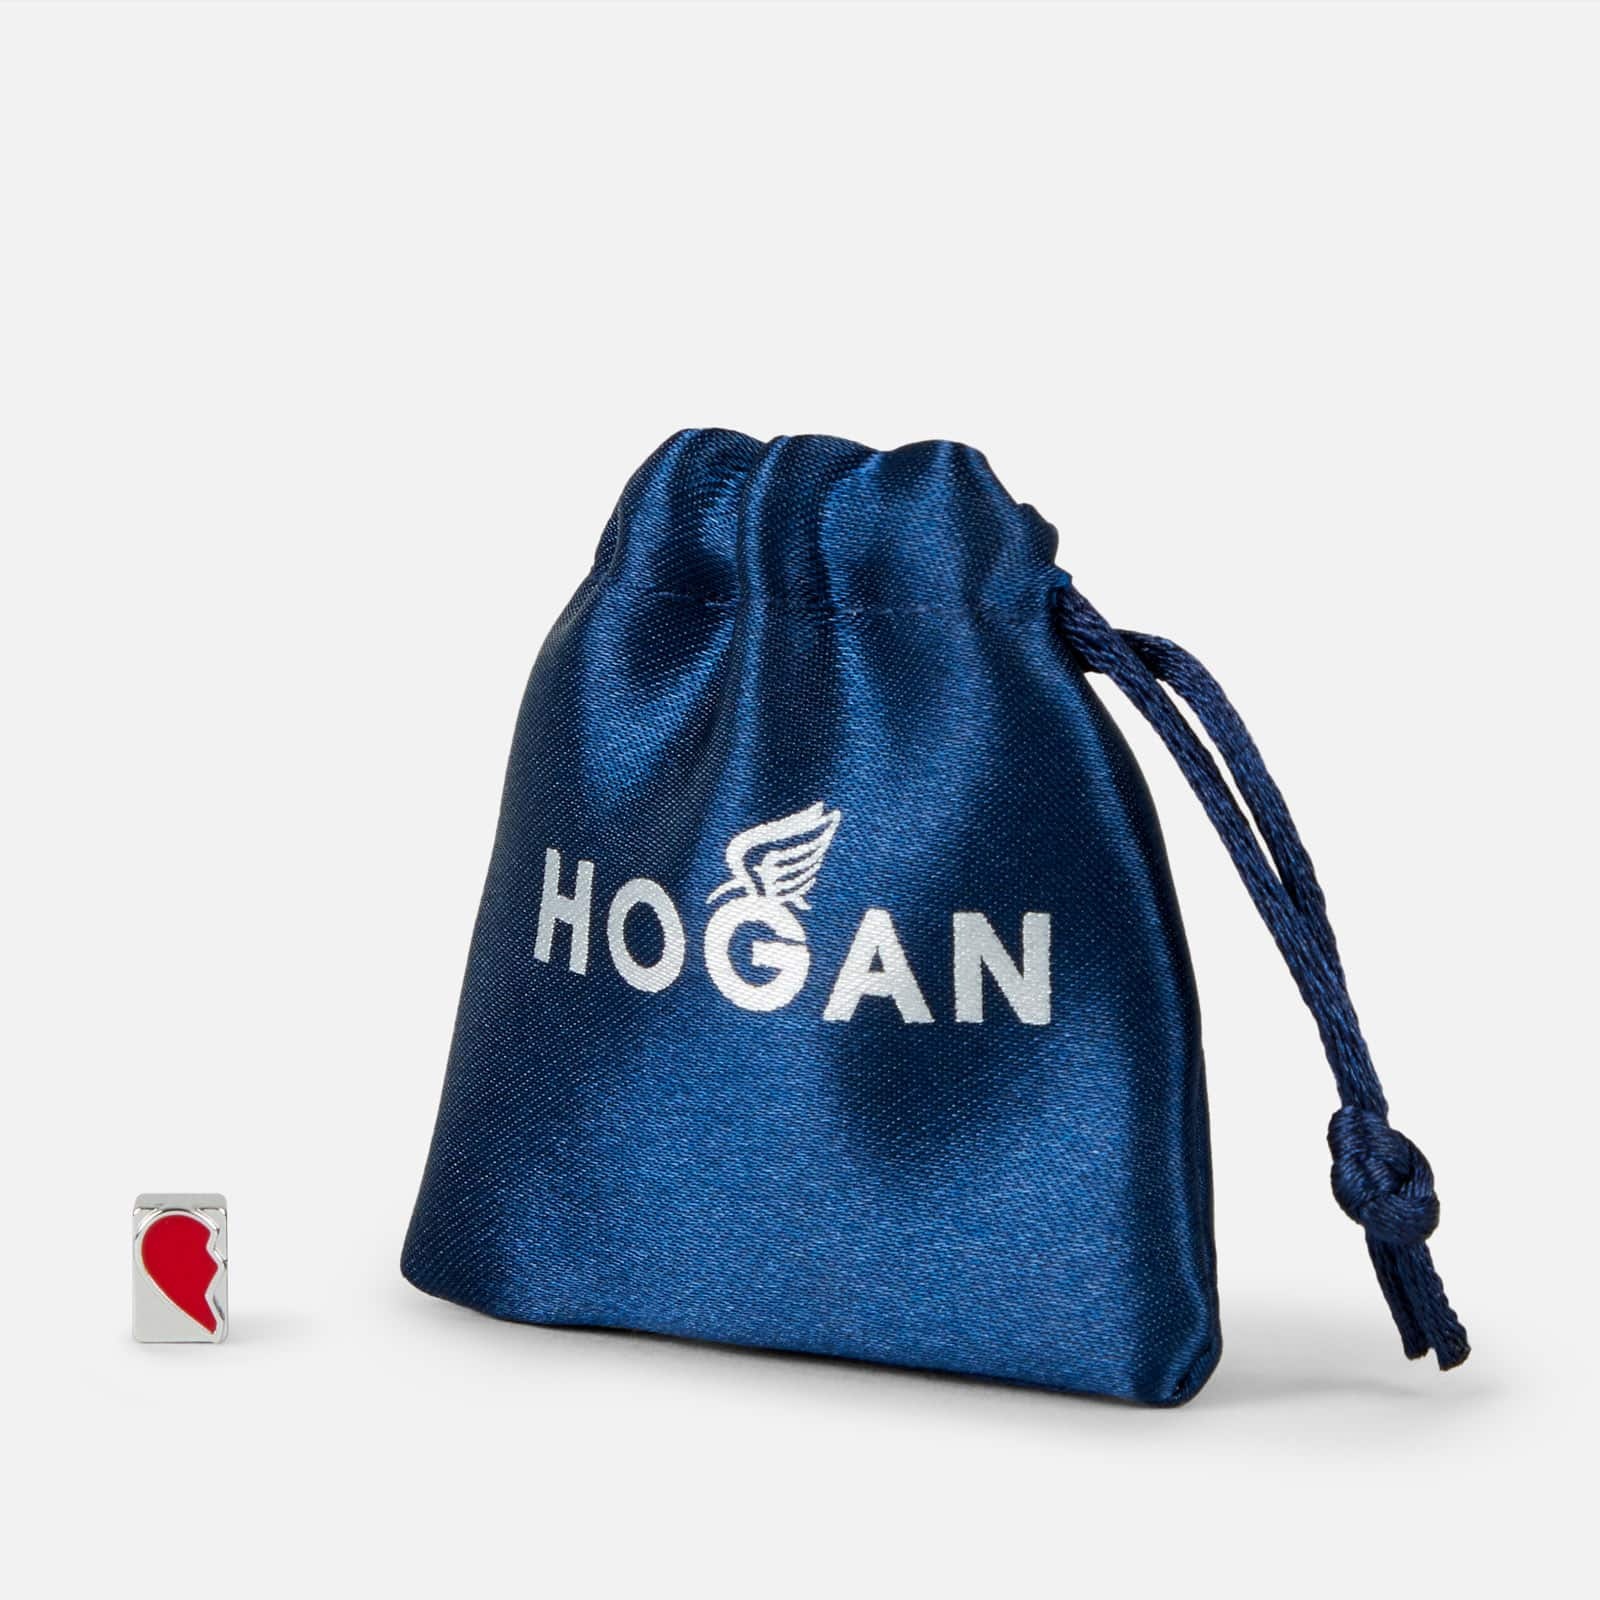 Hogan By You - Shoelace Bead White Gold - 2